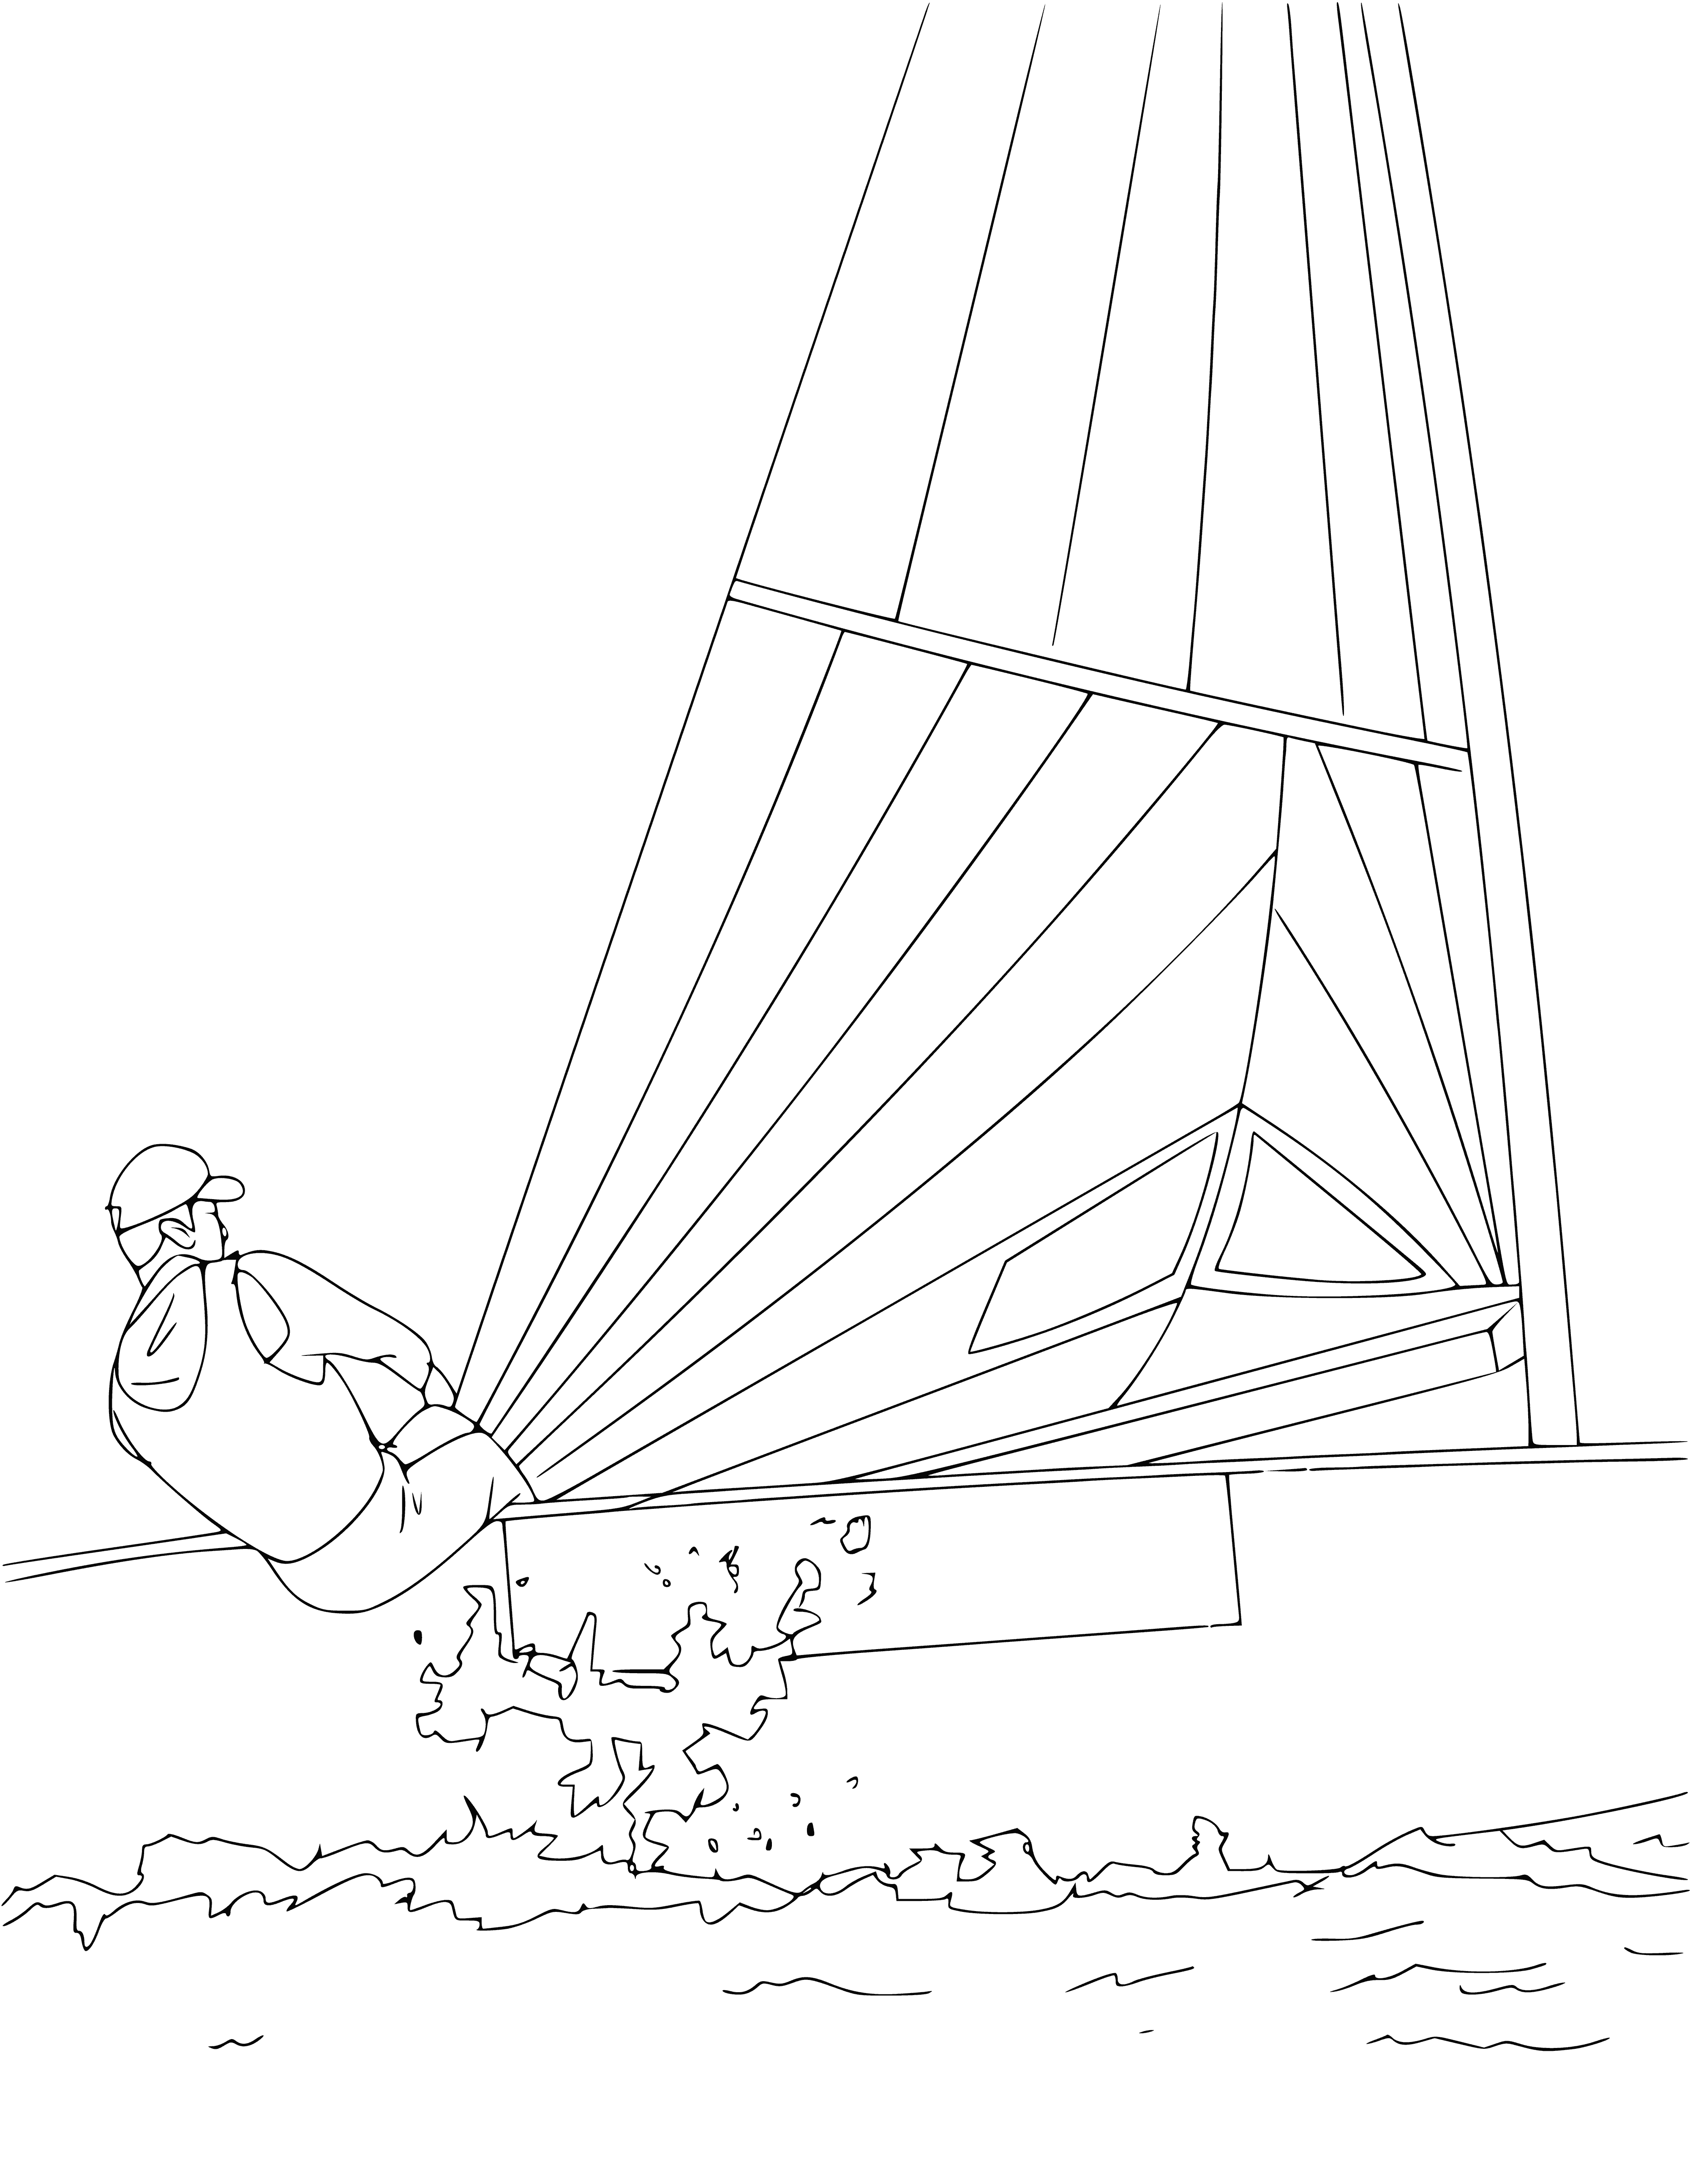 coloring page: People enjoying a sailing boat on bright blue water, white boat with blue stripe down the middle, billowing sails in the wind. #Sailing